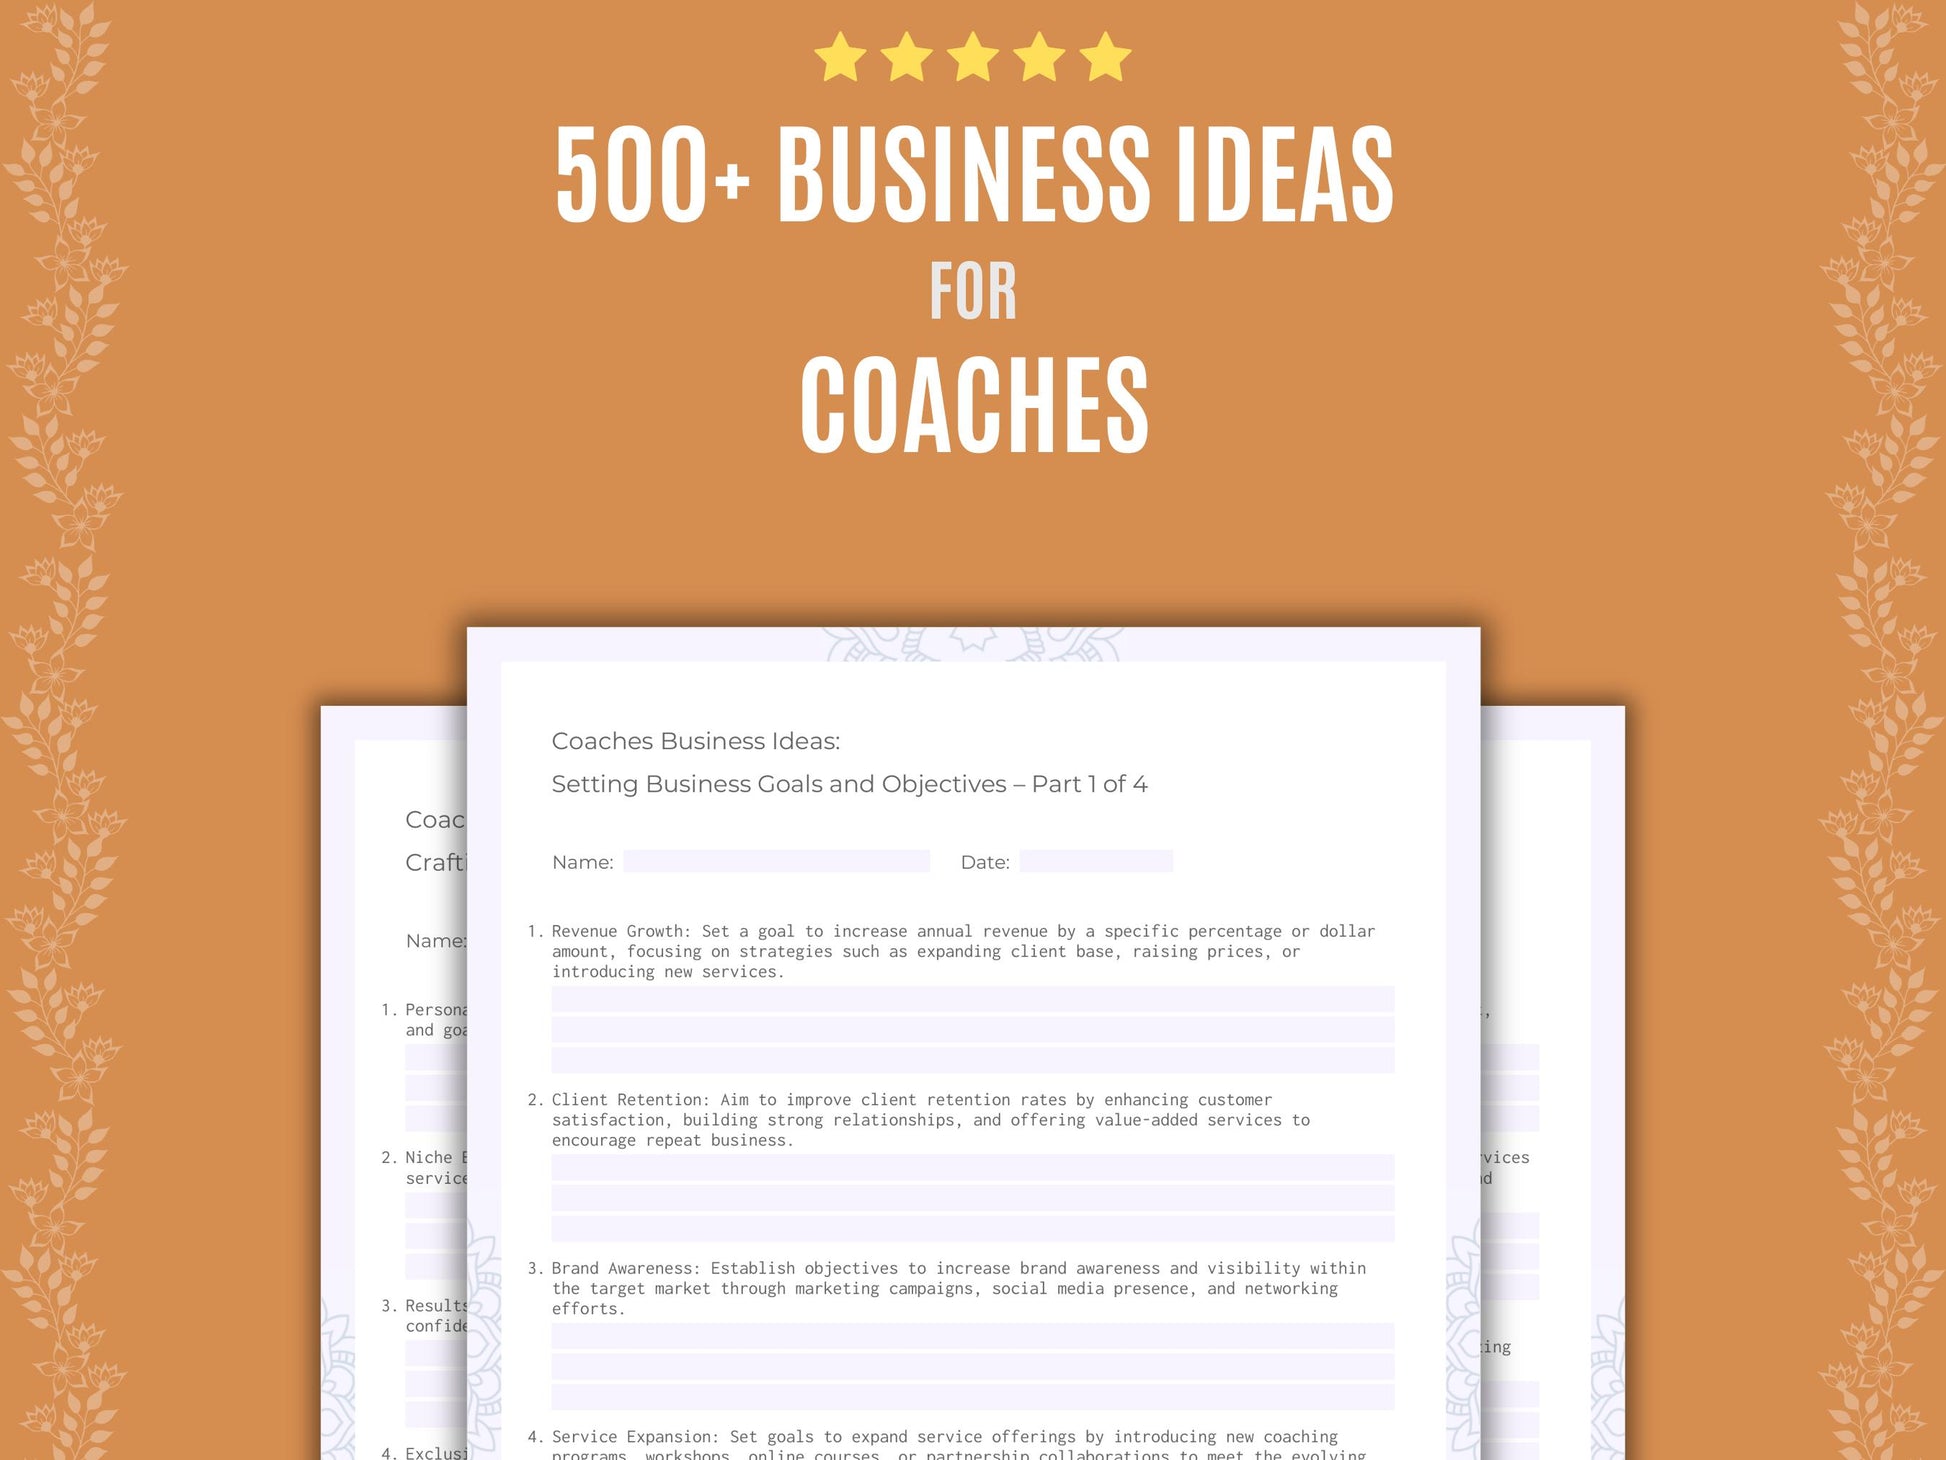 Coaches Business